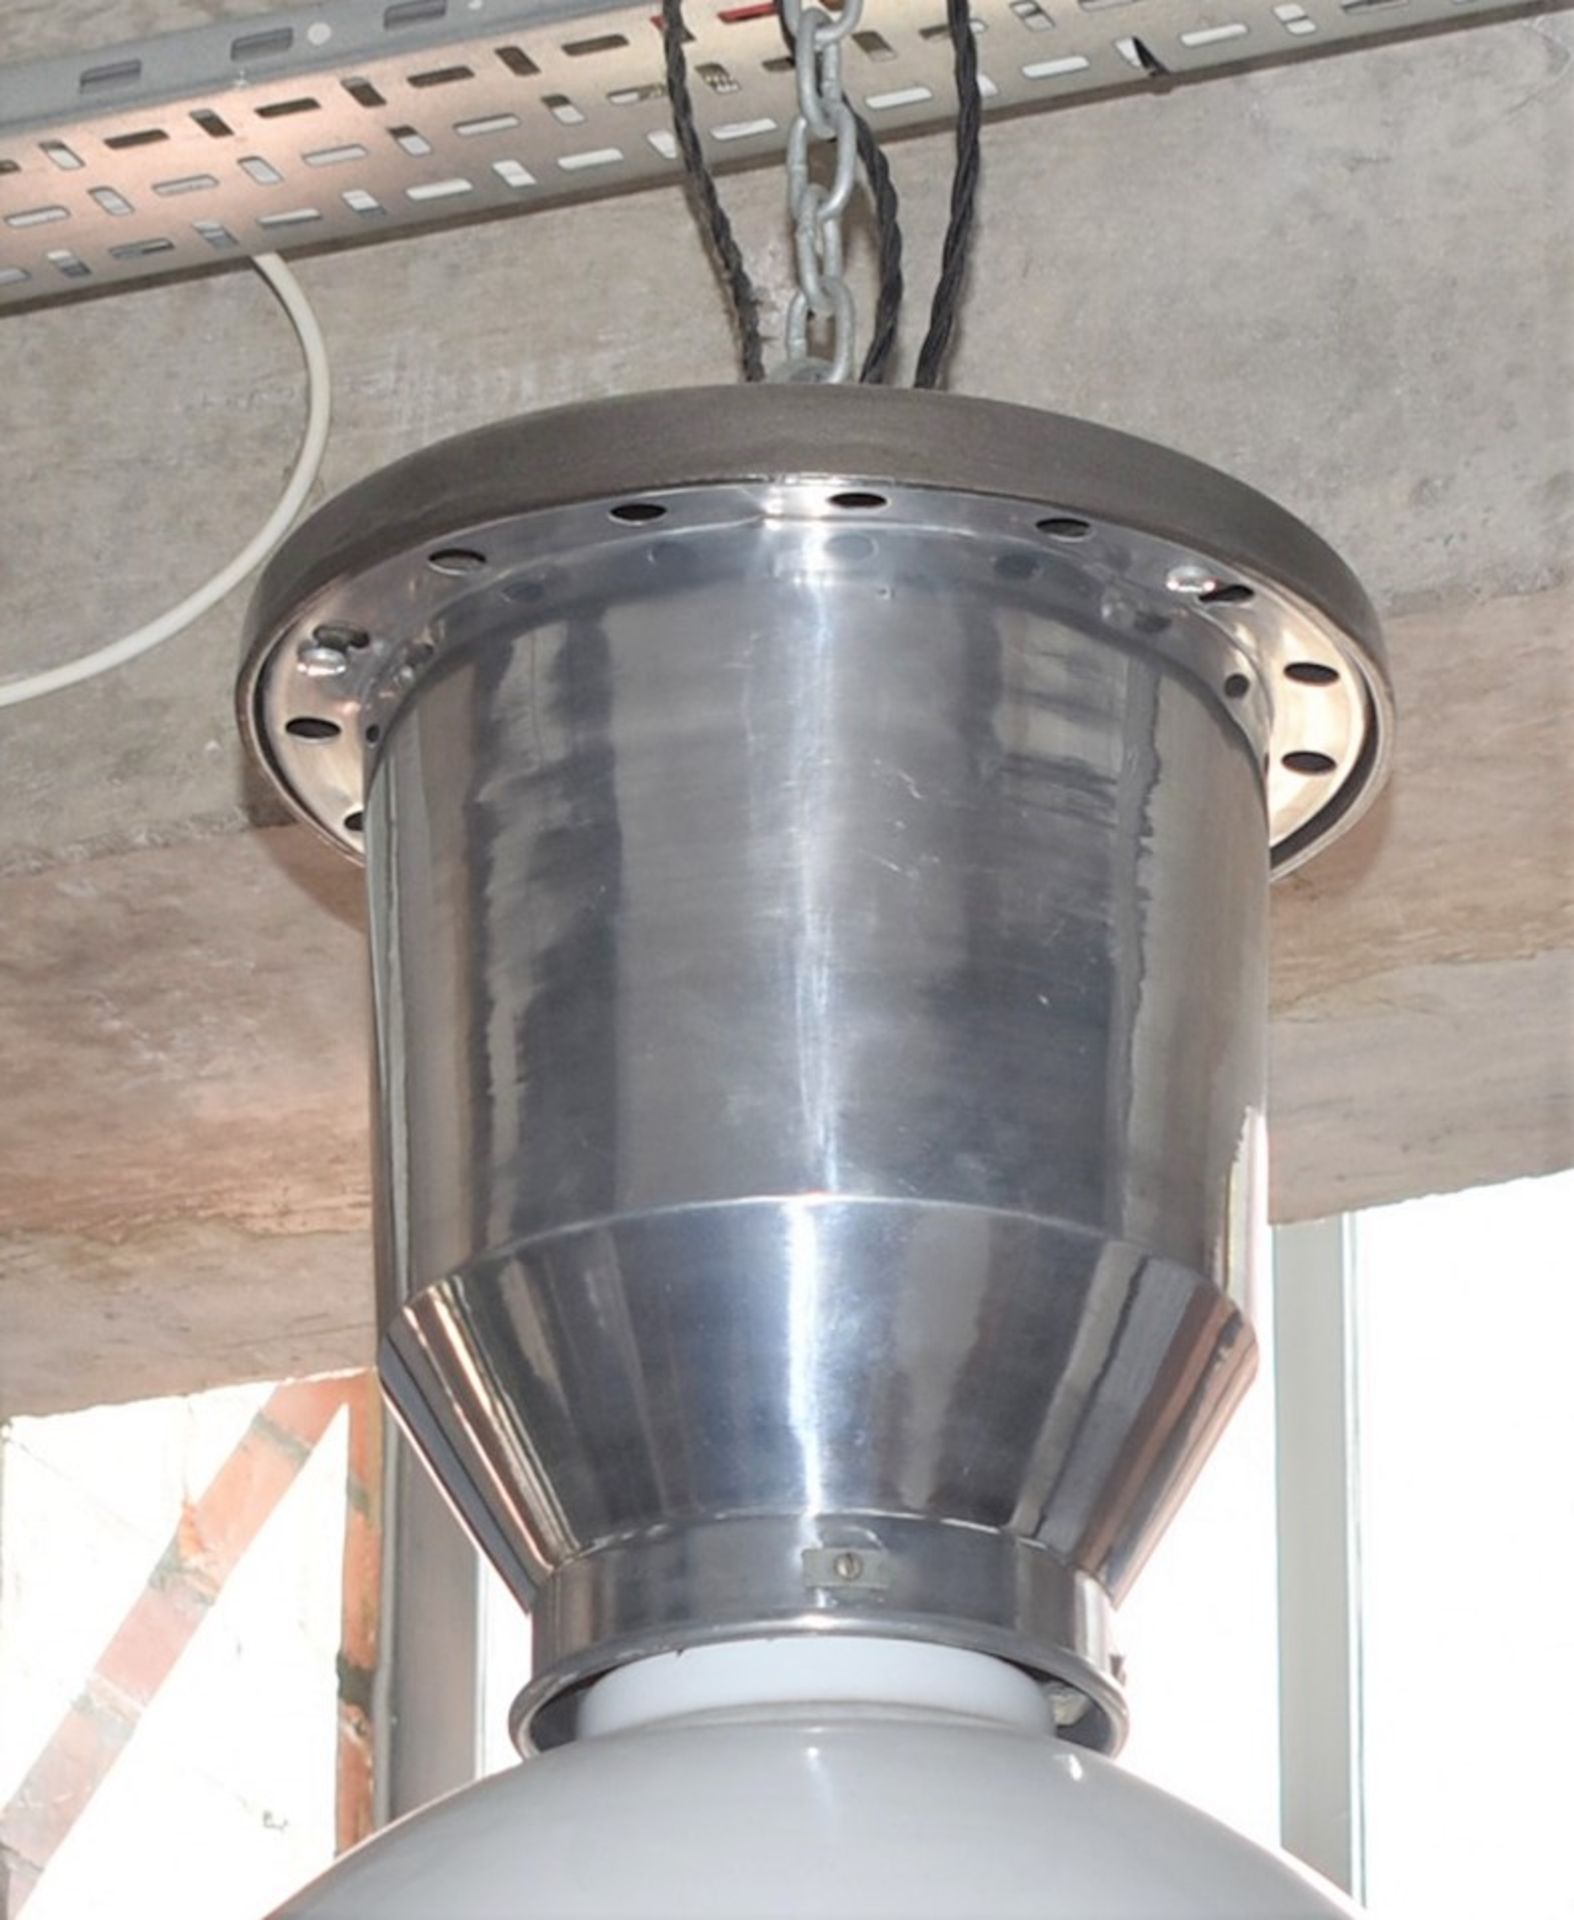 3 x Large Factory Lights With Enamelled Shades, Polished Aluminum Lamp Enclosure and Brushed Steel - Image 4 of 6